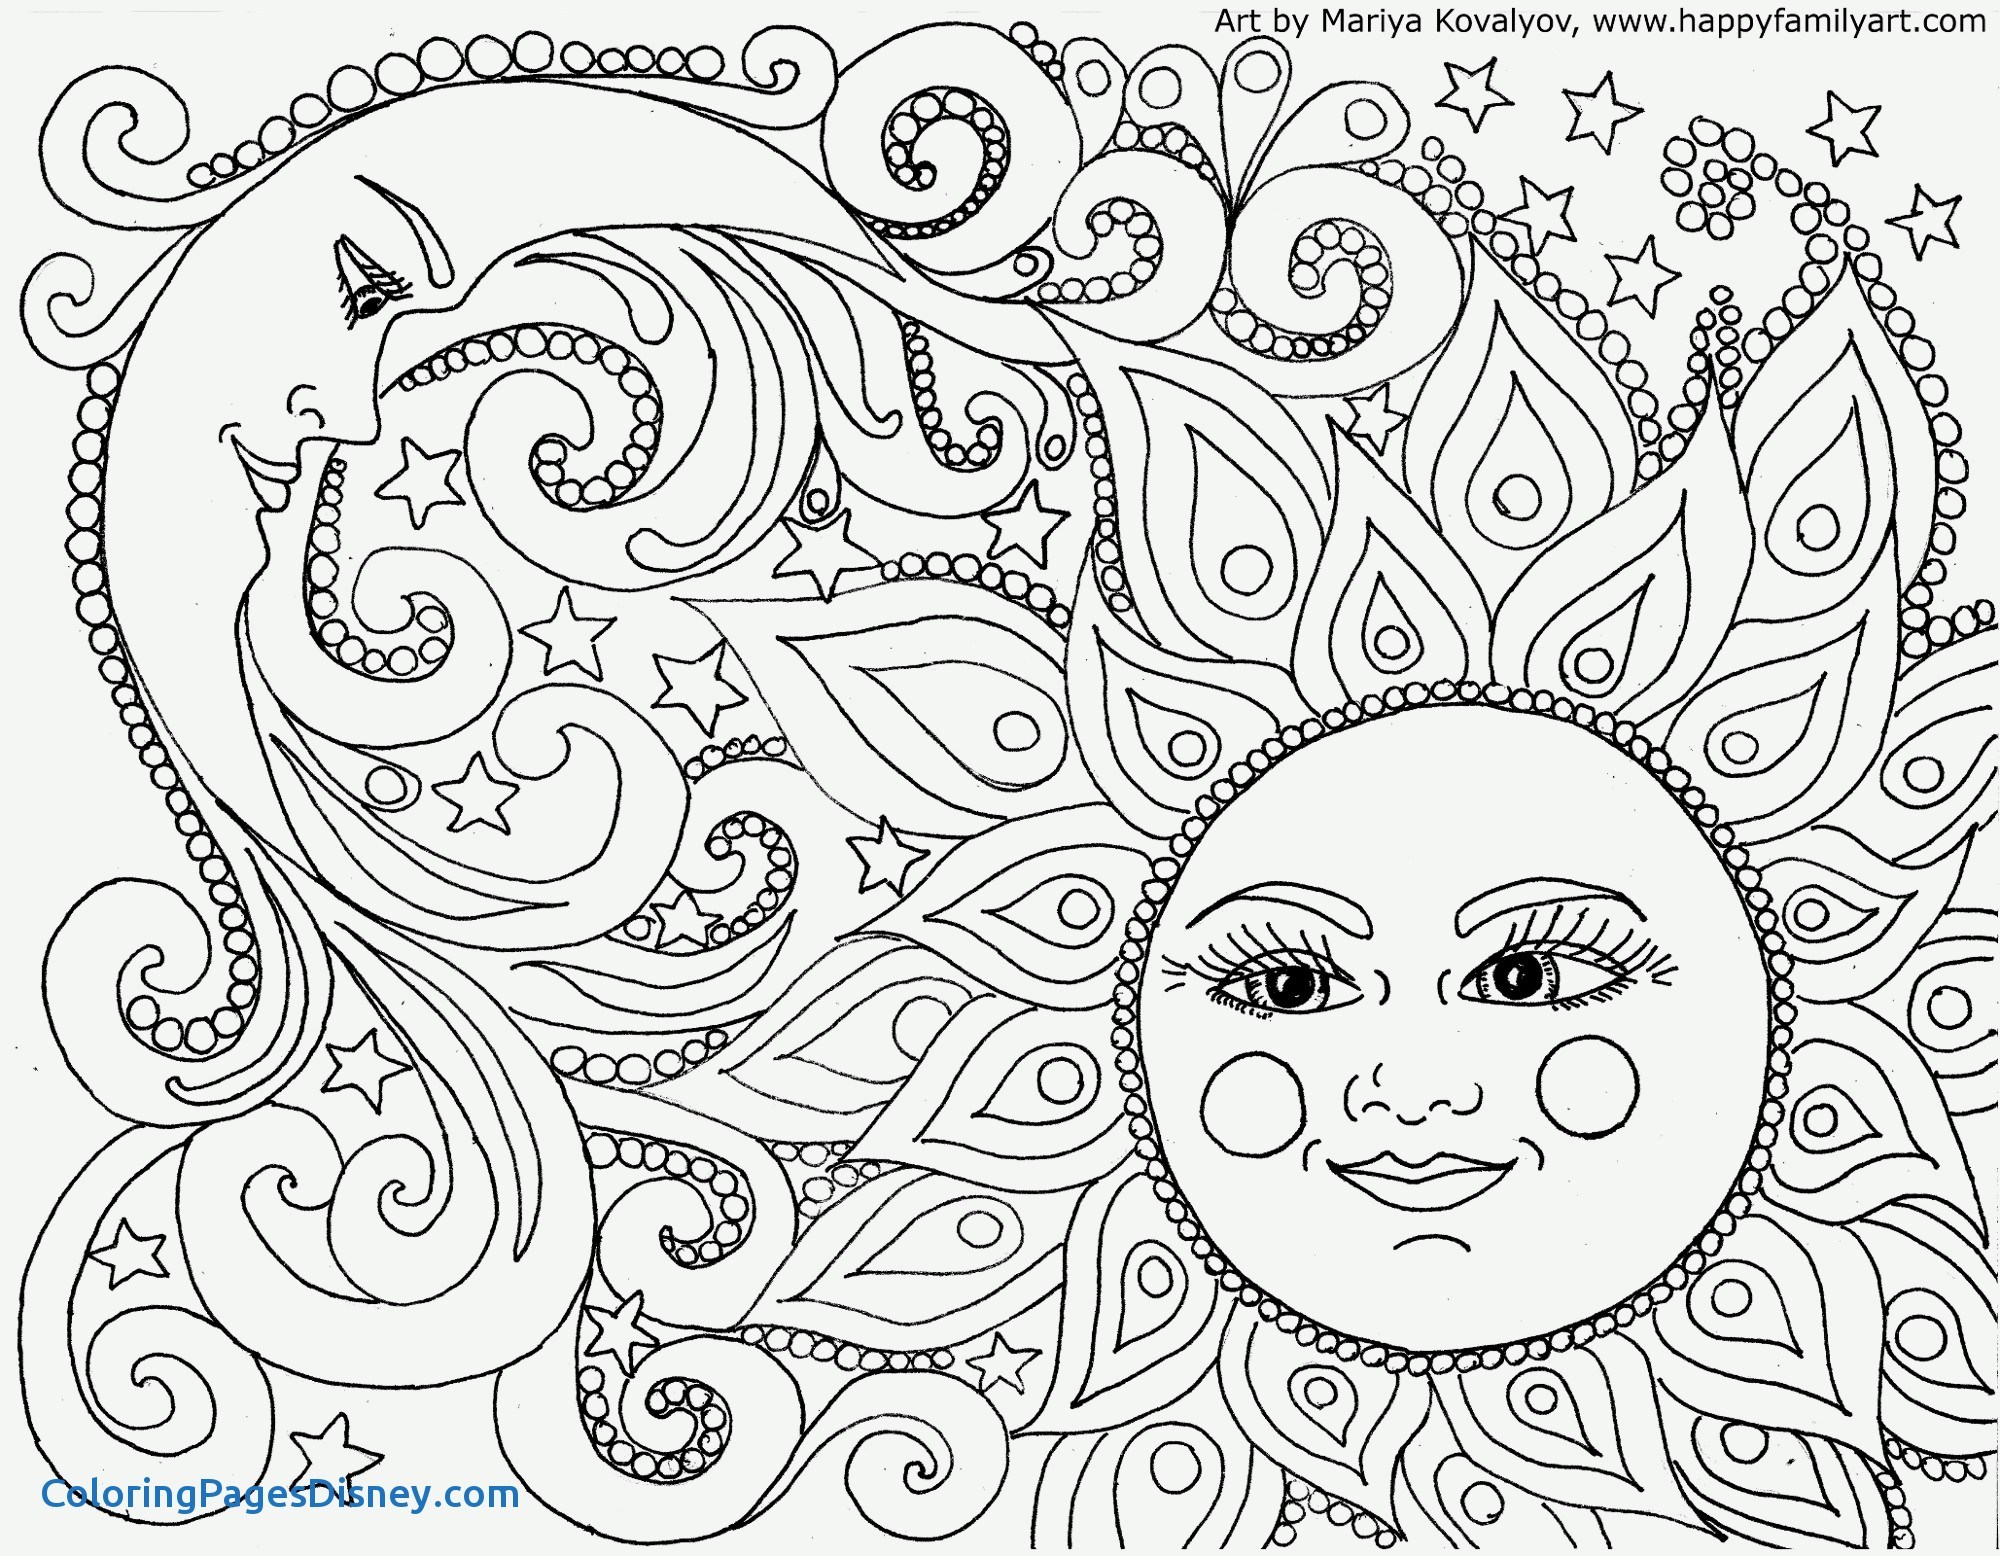 Sci Fi Coloring Pages At GetColorings Free Printable Colorings Pages To Print And Color